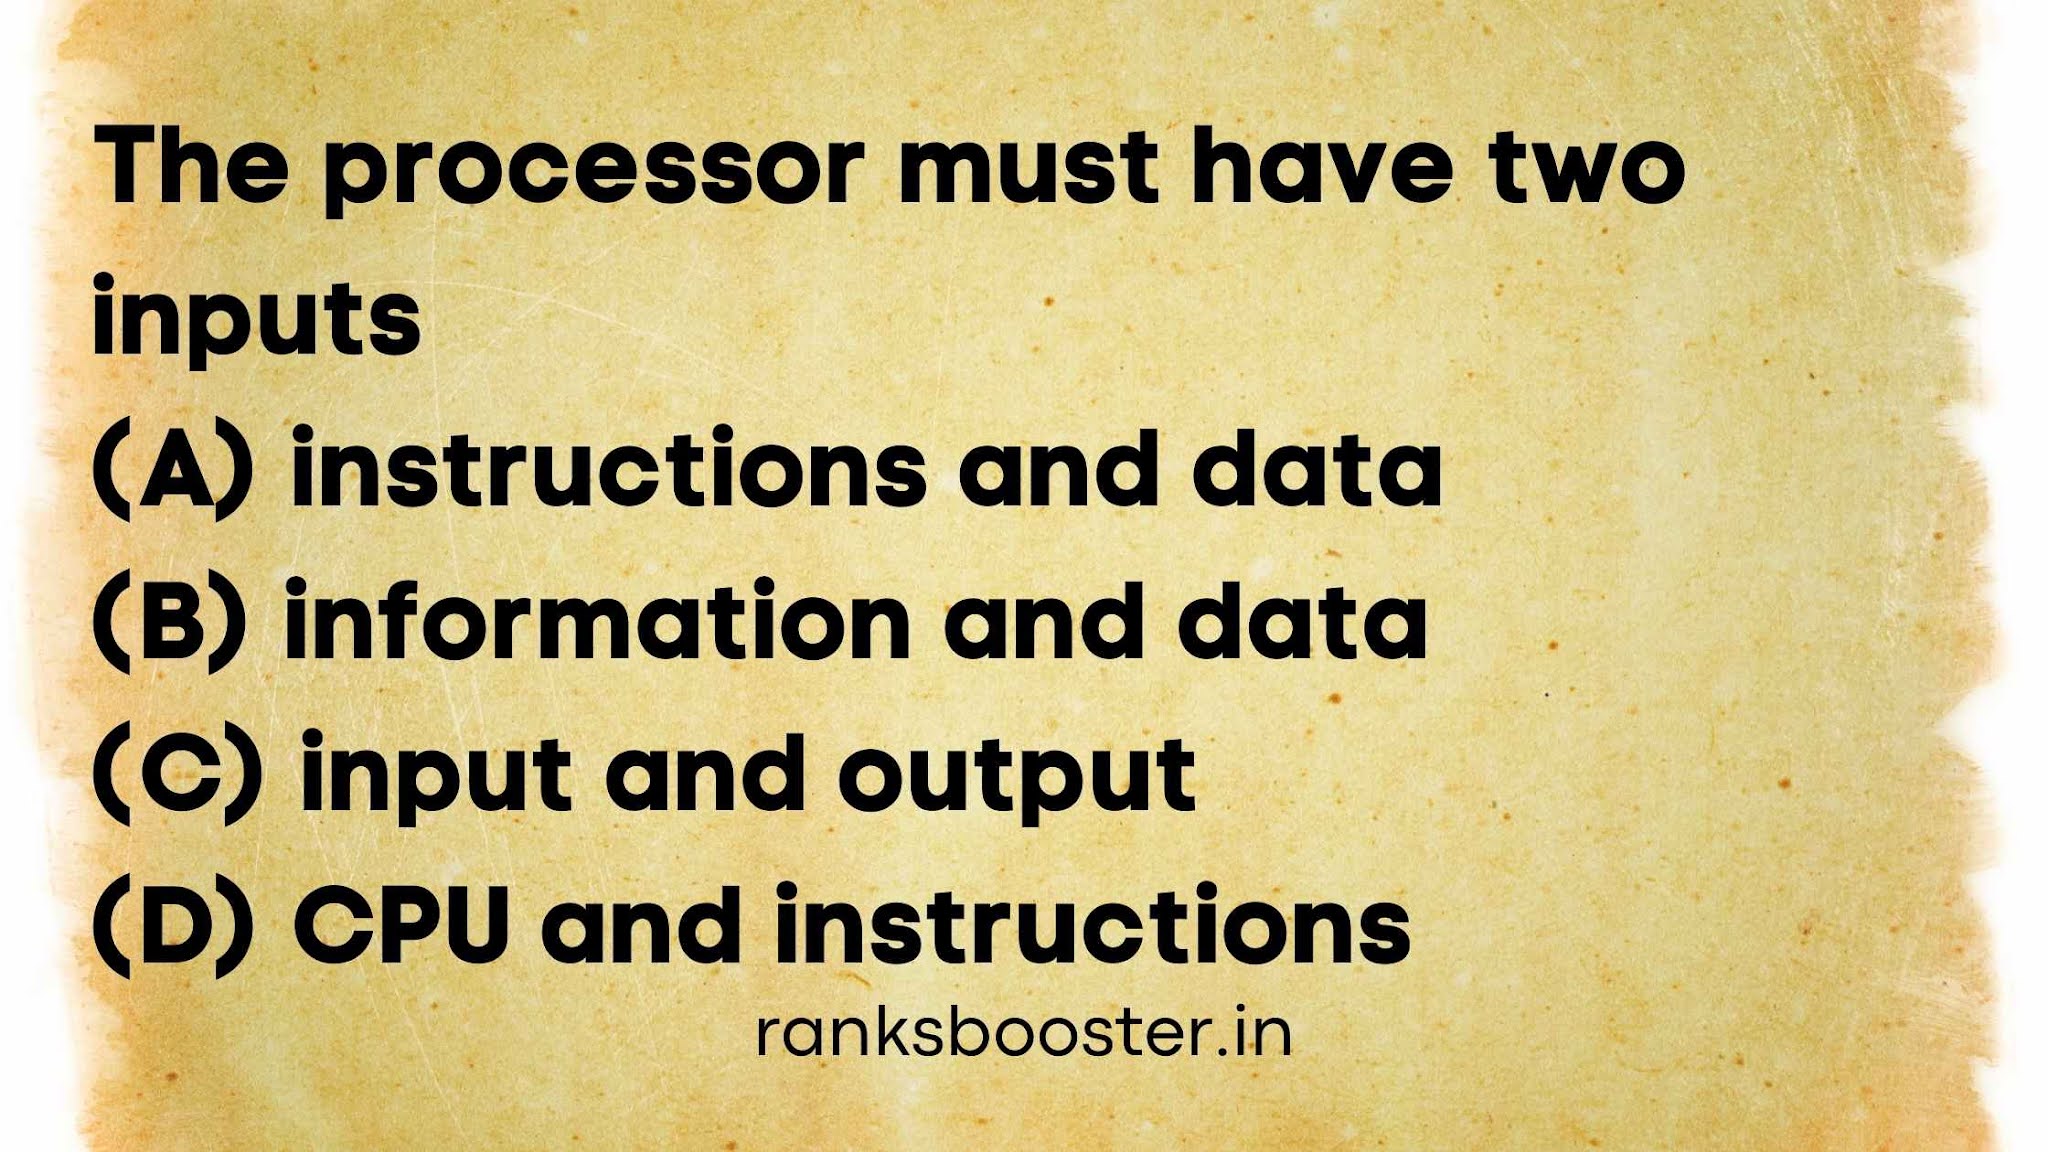 The processor must have two inputs (A) instructions and data (B) information and data (C) input and output (D) CPU and instructions